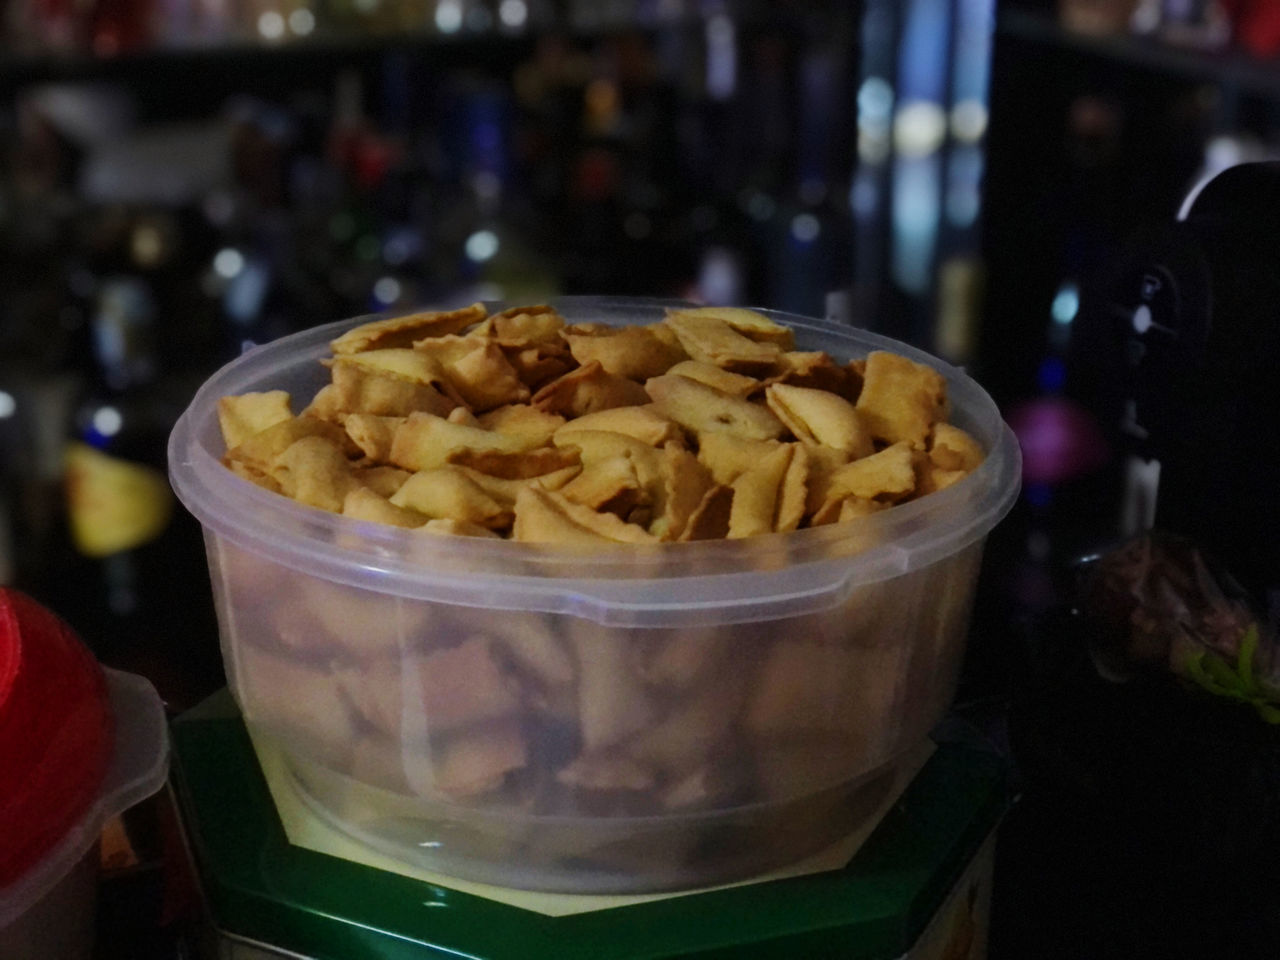 CLOSE-UP OF FOOD ON TABLE AT NIGHT